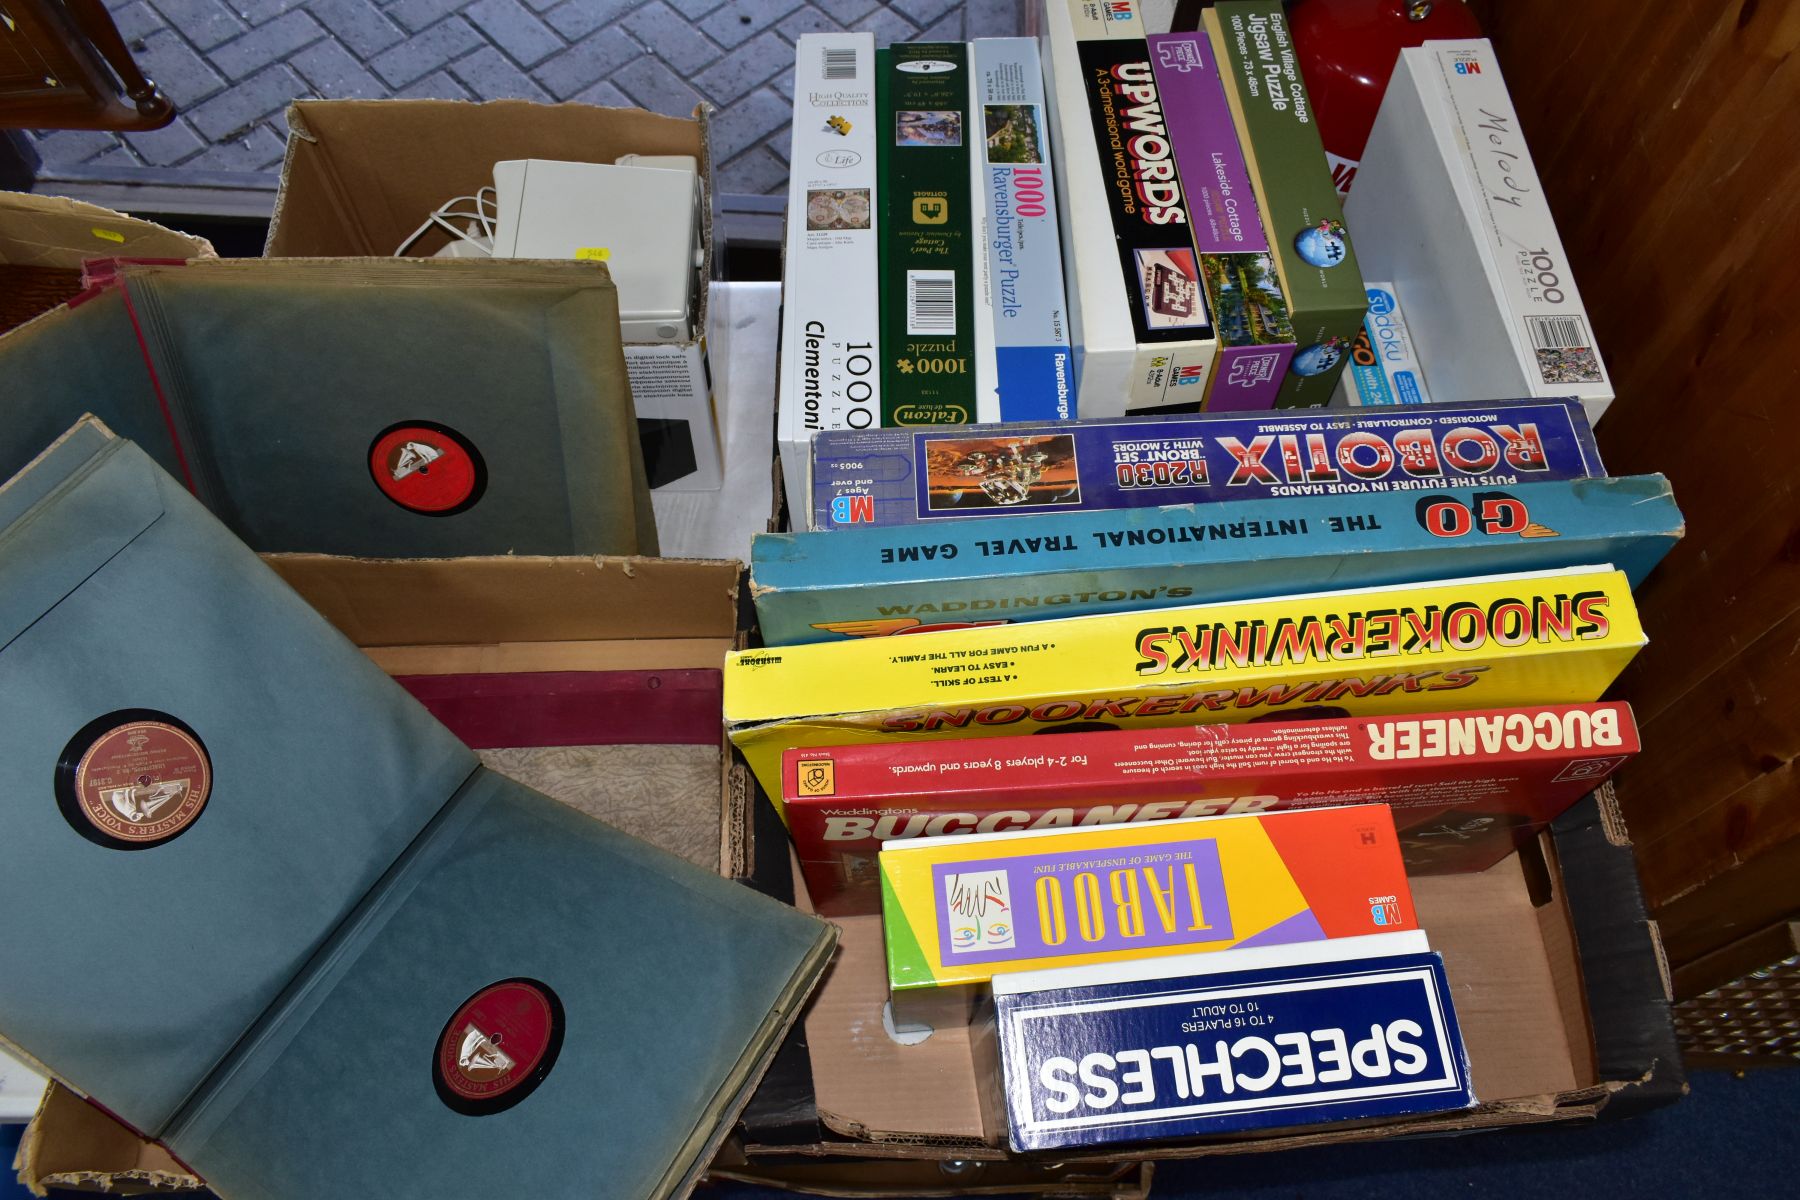 FOUR BOXES OF BOXED GAMES, MODERN JIGSAW PUZZLES, three albums of 78's and a box of Cambridge